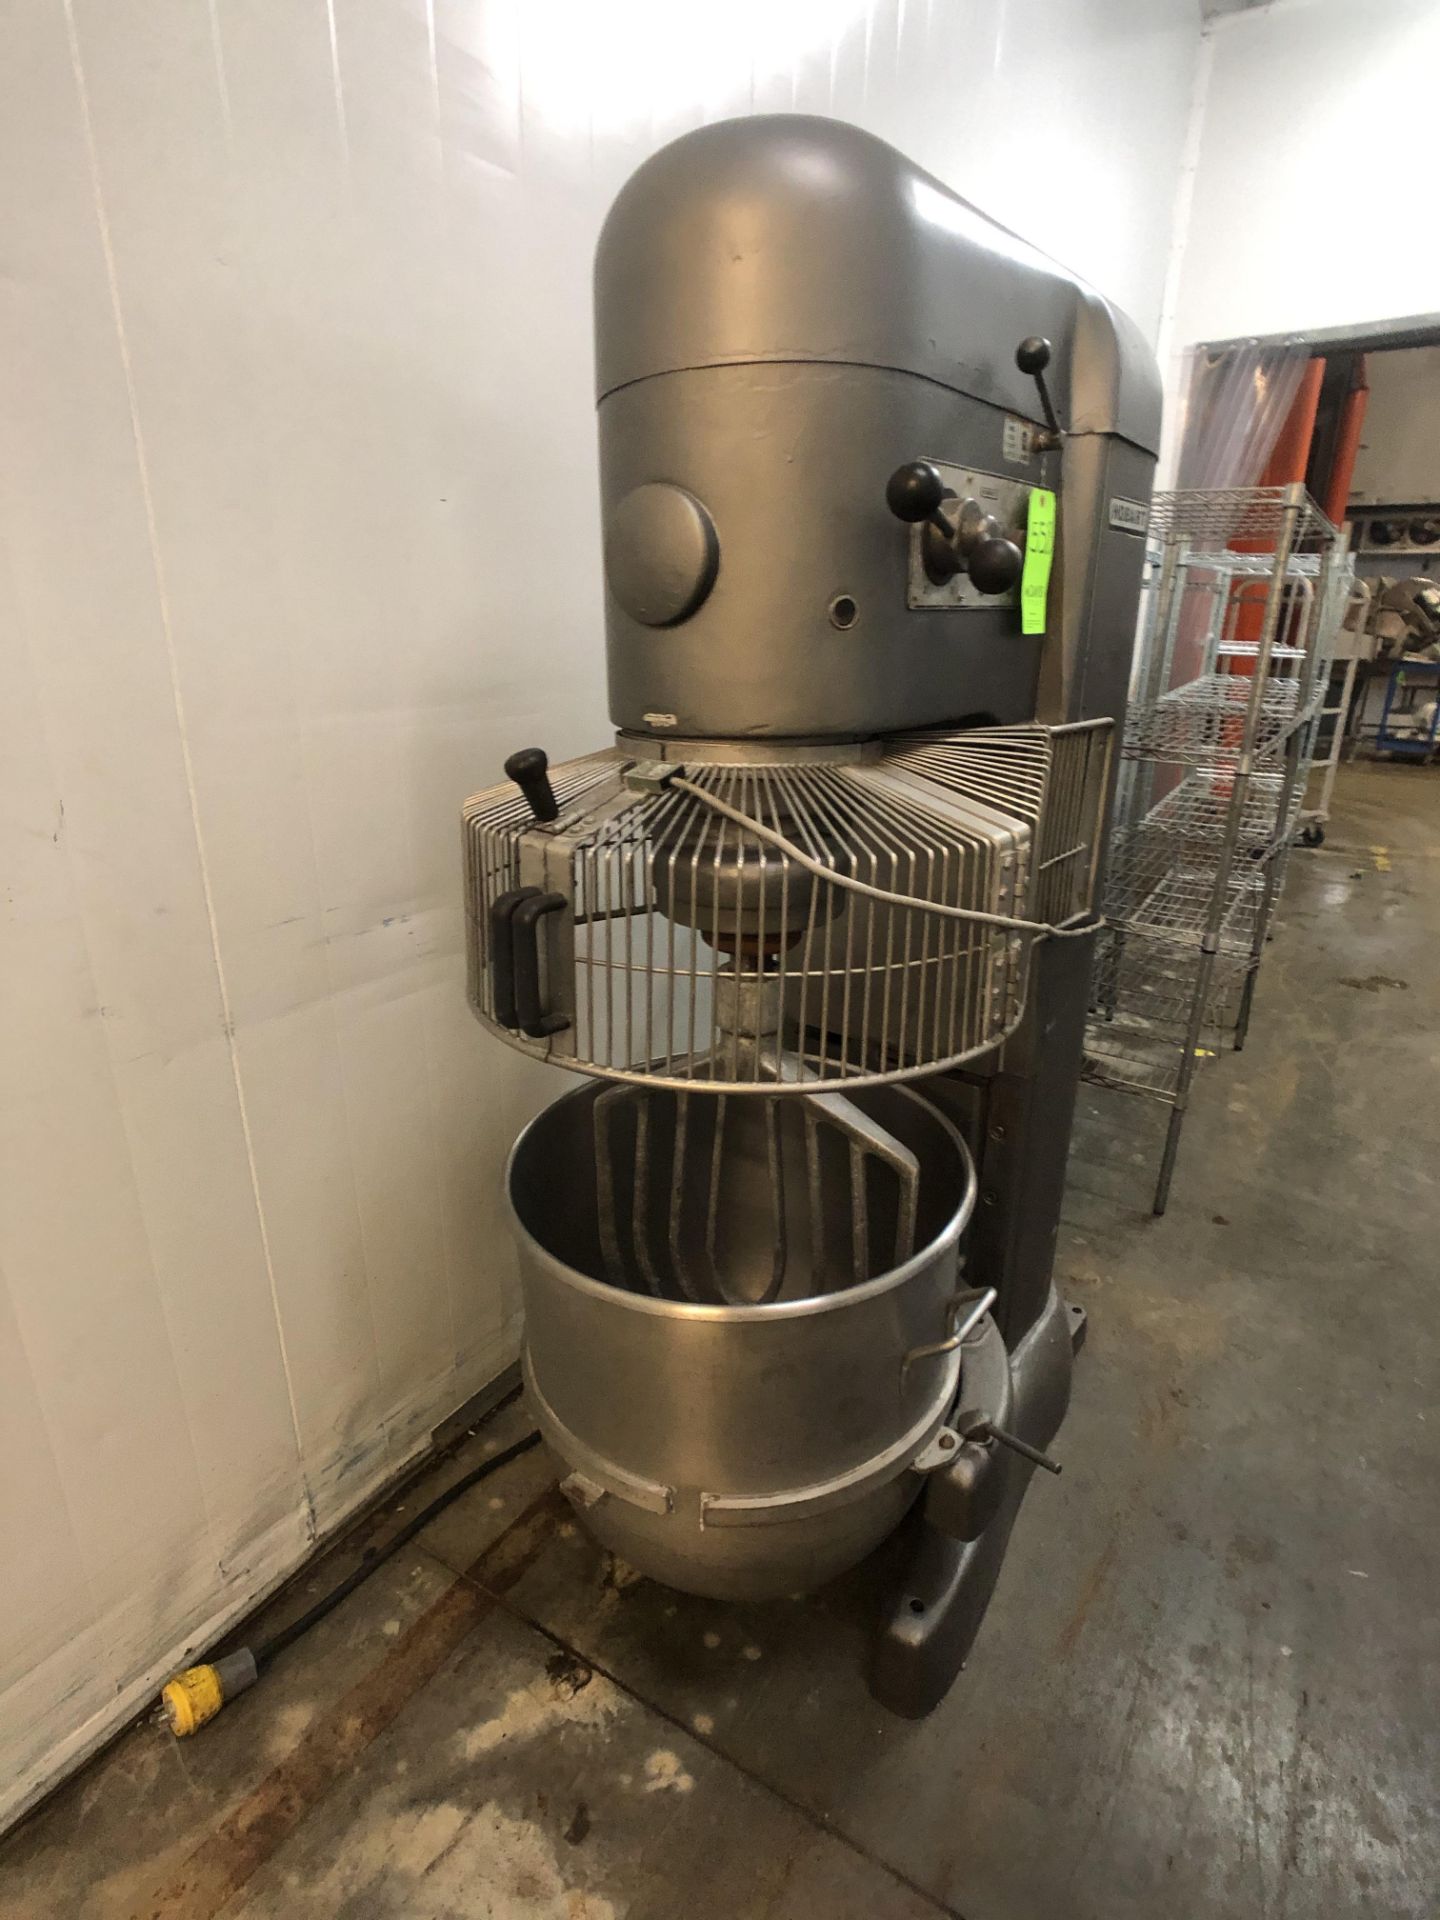 HOBART MIXER MODEL V1401 W/ BOWL 140 Qt. AND BEATER ATTACHMENT - Image 2 of 8